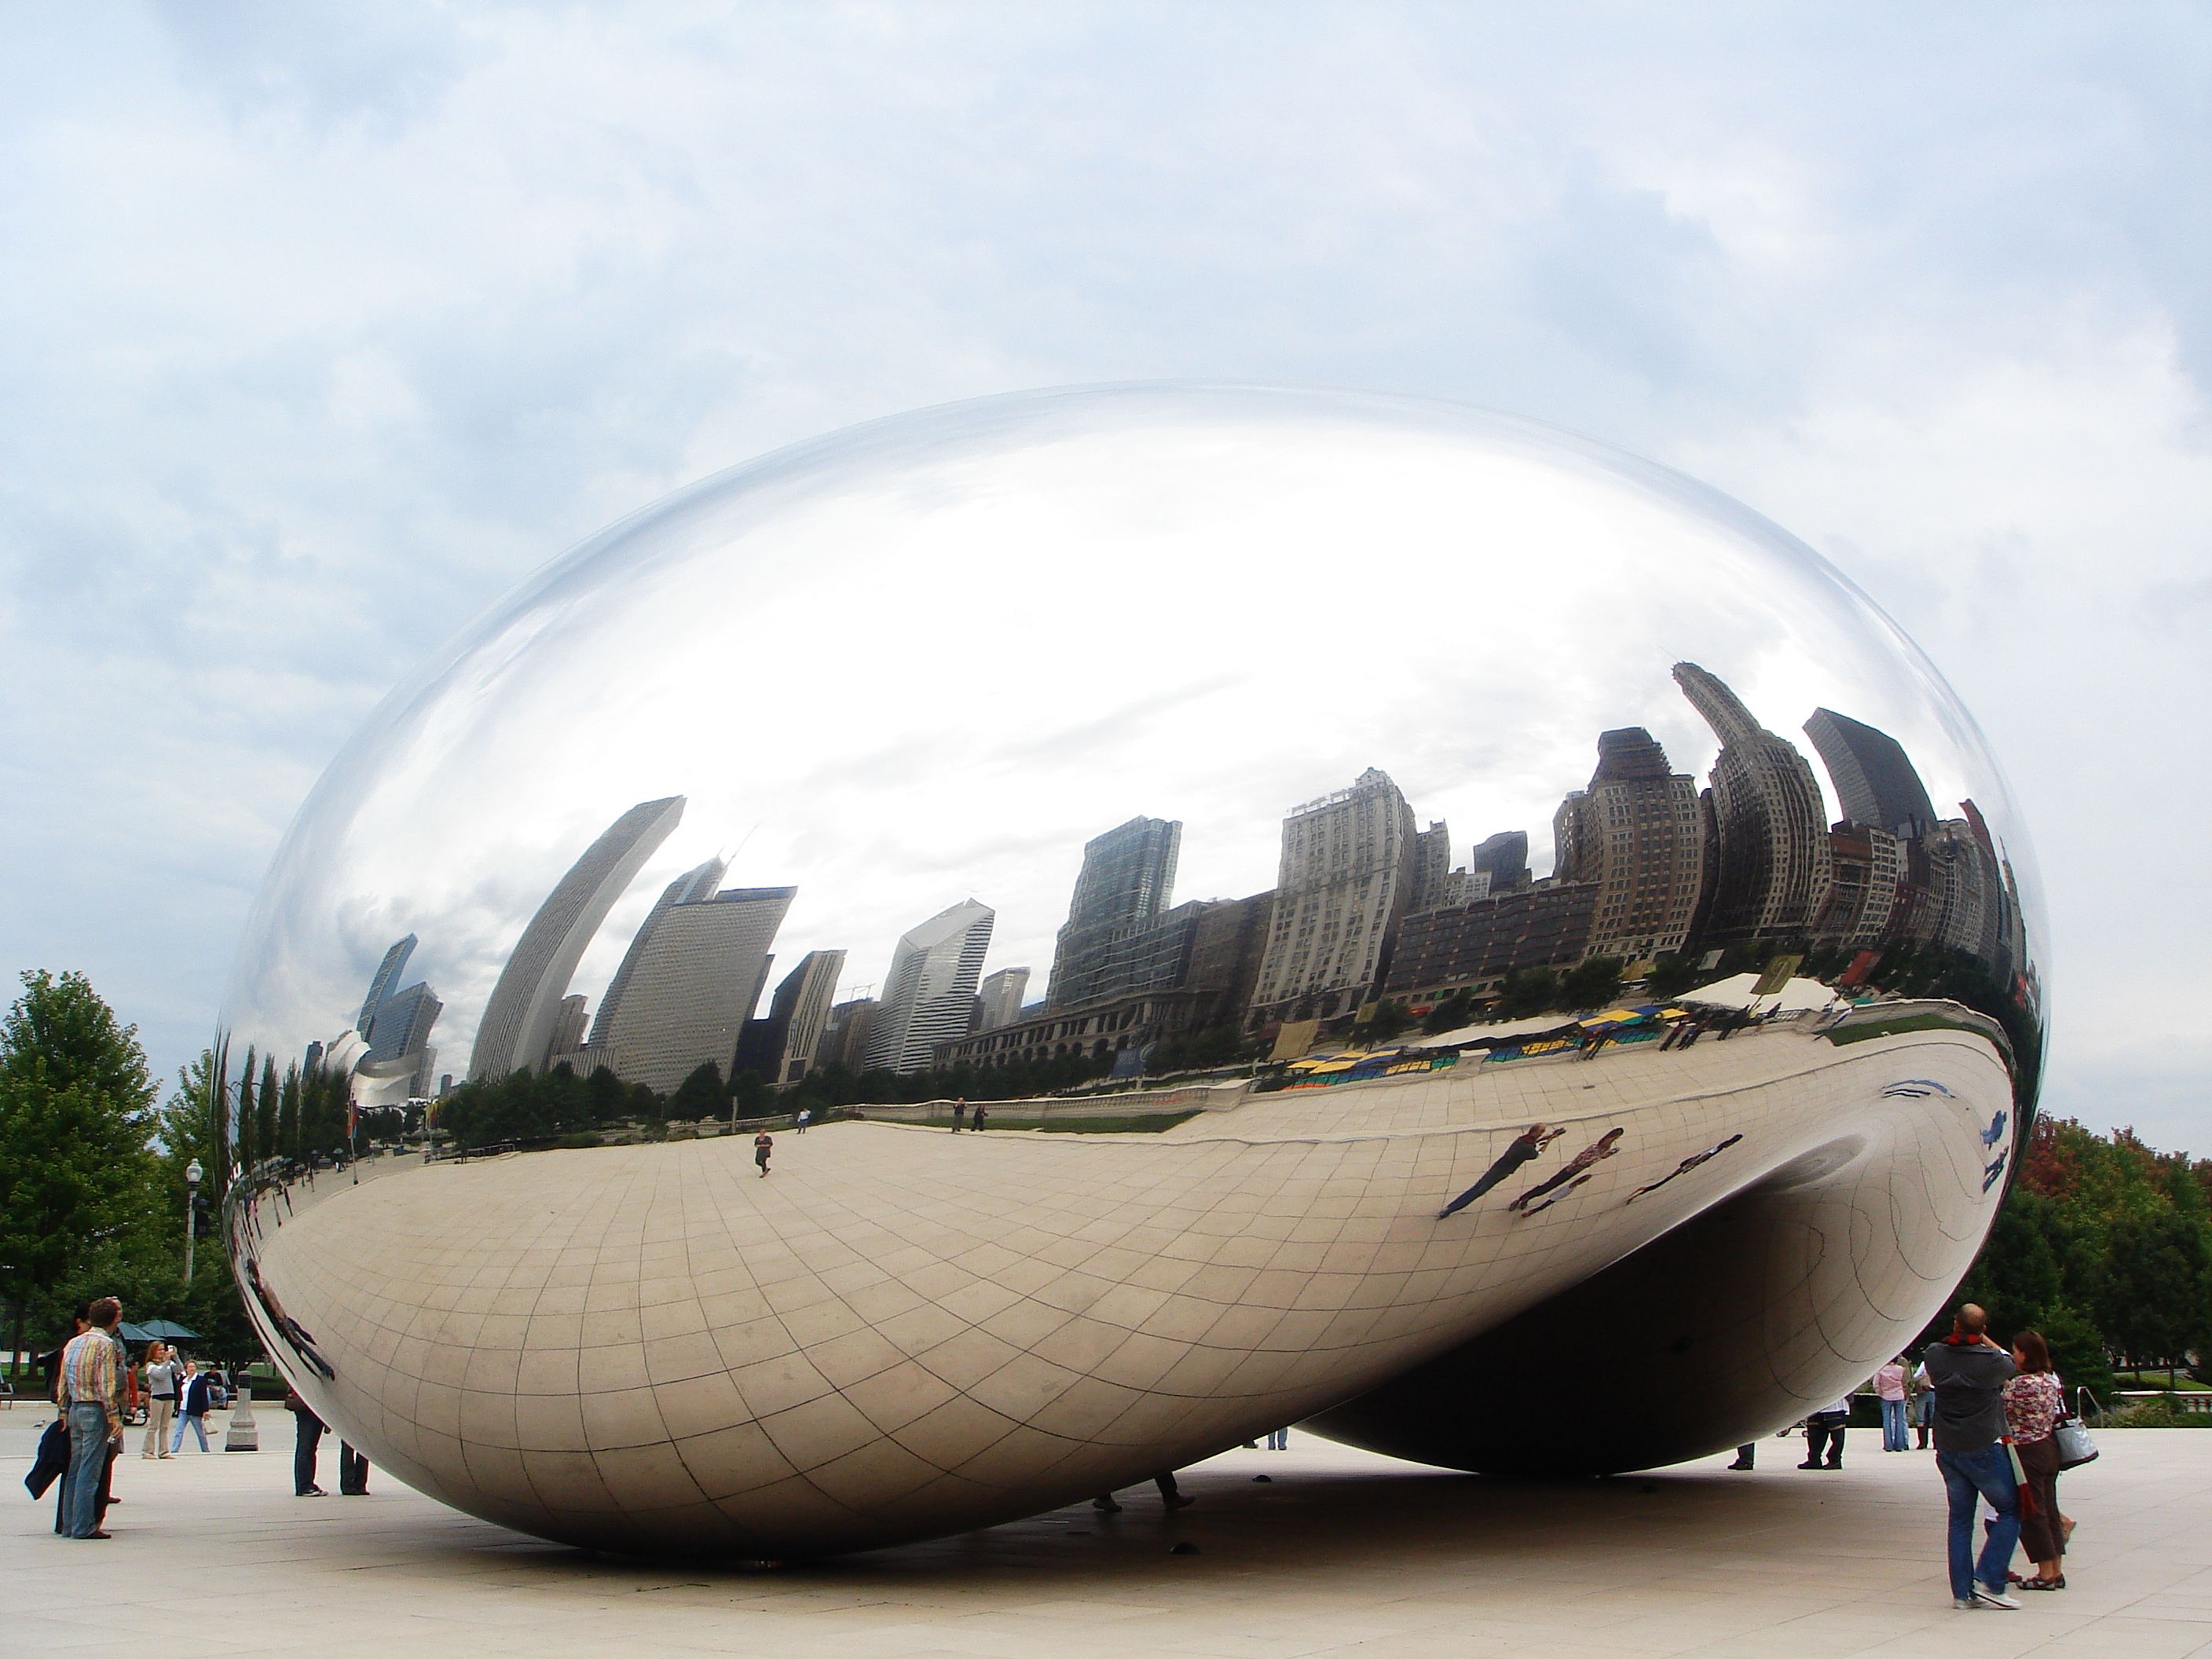 Anish Kapoor Cloud Gate – “The Bean”, Chicago, 2004